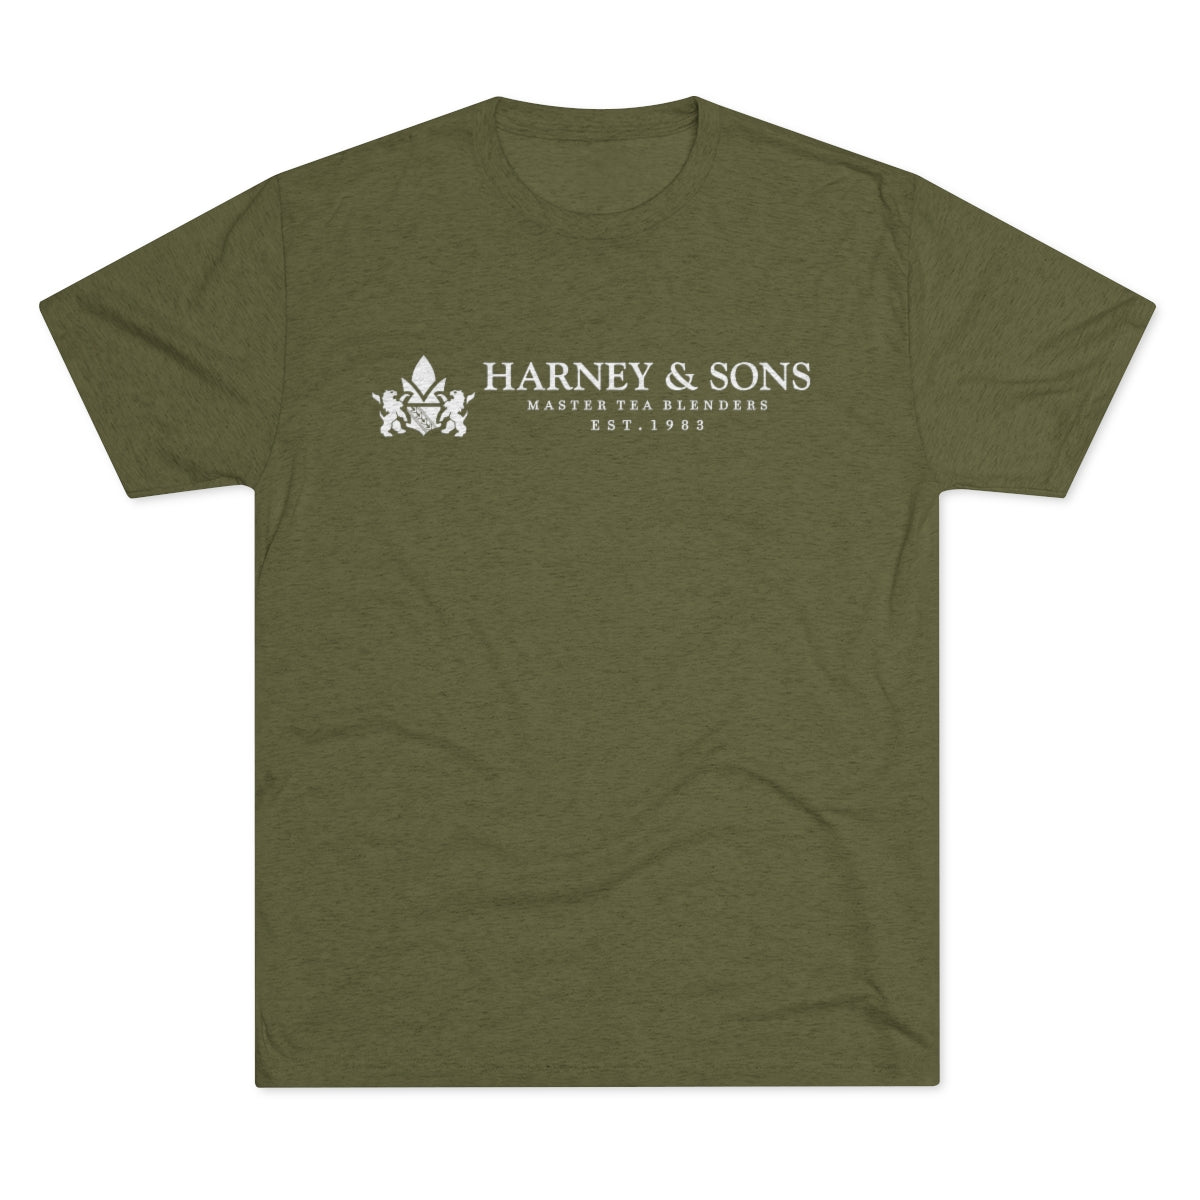 Harney & Sons - Est. 1983 Graphic Tee - Tri-Blend Military Green S - Harney & Sons Fine Teas